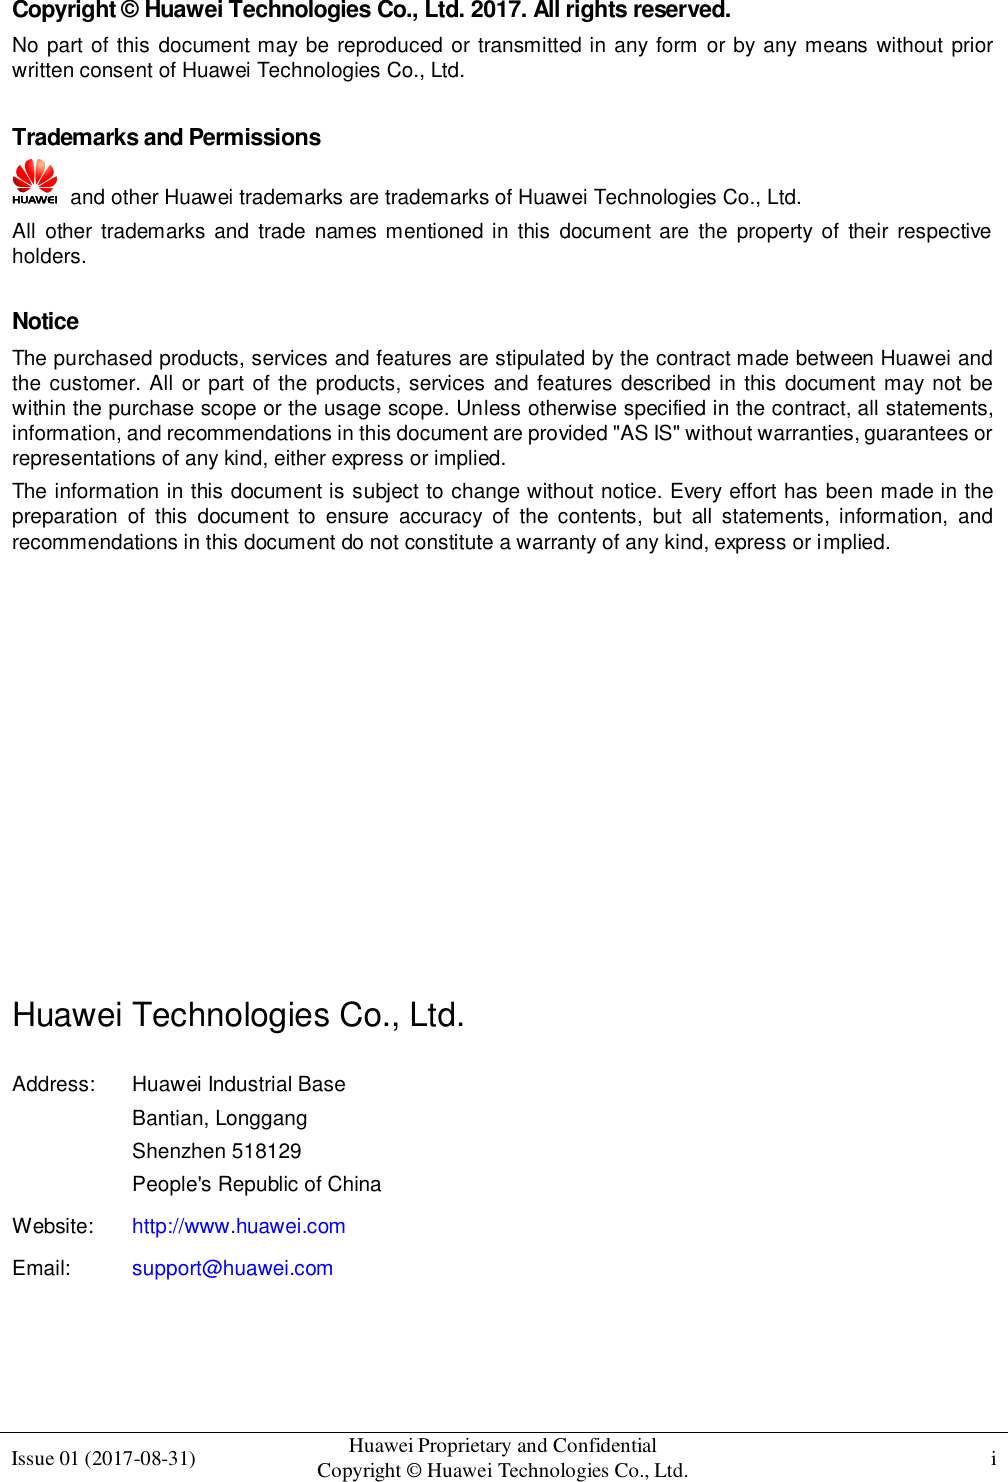  Issue 01 (2017-08-31)  Huawei Proprietary and Confidential                                     Copyright © Huawei Technologies Co., Ltd.  i    Copyright © Huawei Technologies Co., Ltd. 2017. All rights reserved. No part of this document may be reproduced or transmitted in any form or by any means without prior written consent of Huawei Technologies Co., Ltd.  Trademarks and Permissions   and other Huawei trademarks are trademarks of Huawei Technologies Co., Ltd. All  other trademarks and  trade  names mentioned in  this  document  are  the  property  of  their  respective holders.  Notice The purchased products, services and features are stipulated by the contract made between Huawei and the customer. All or part of the products, services and features described in this document may not be within the purchase scope or the usage scope. Unless otherwise specified in the contract, all statements, information, and recommendations in this document are provided &quot;AS IS&quot; without warranties, guarantees or representations of any kind, either express or implied. The information in this document is subject to change without notice. Every effort has been made in the preparation  of  this  document  to  ensure  accuracy  of  the  contents,  but  all  statements,  information,  and recommendations in this document do not constitute a warranty of any kind, express or implied.           Huawei Technologies Co., Ltd. Address:  Huawei Industrial Base Bantian, Longgang Shenzhen 518129 People&apos;s Republic of China Website:  http://www.huawei.com Email:  support@huawei.com   